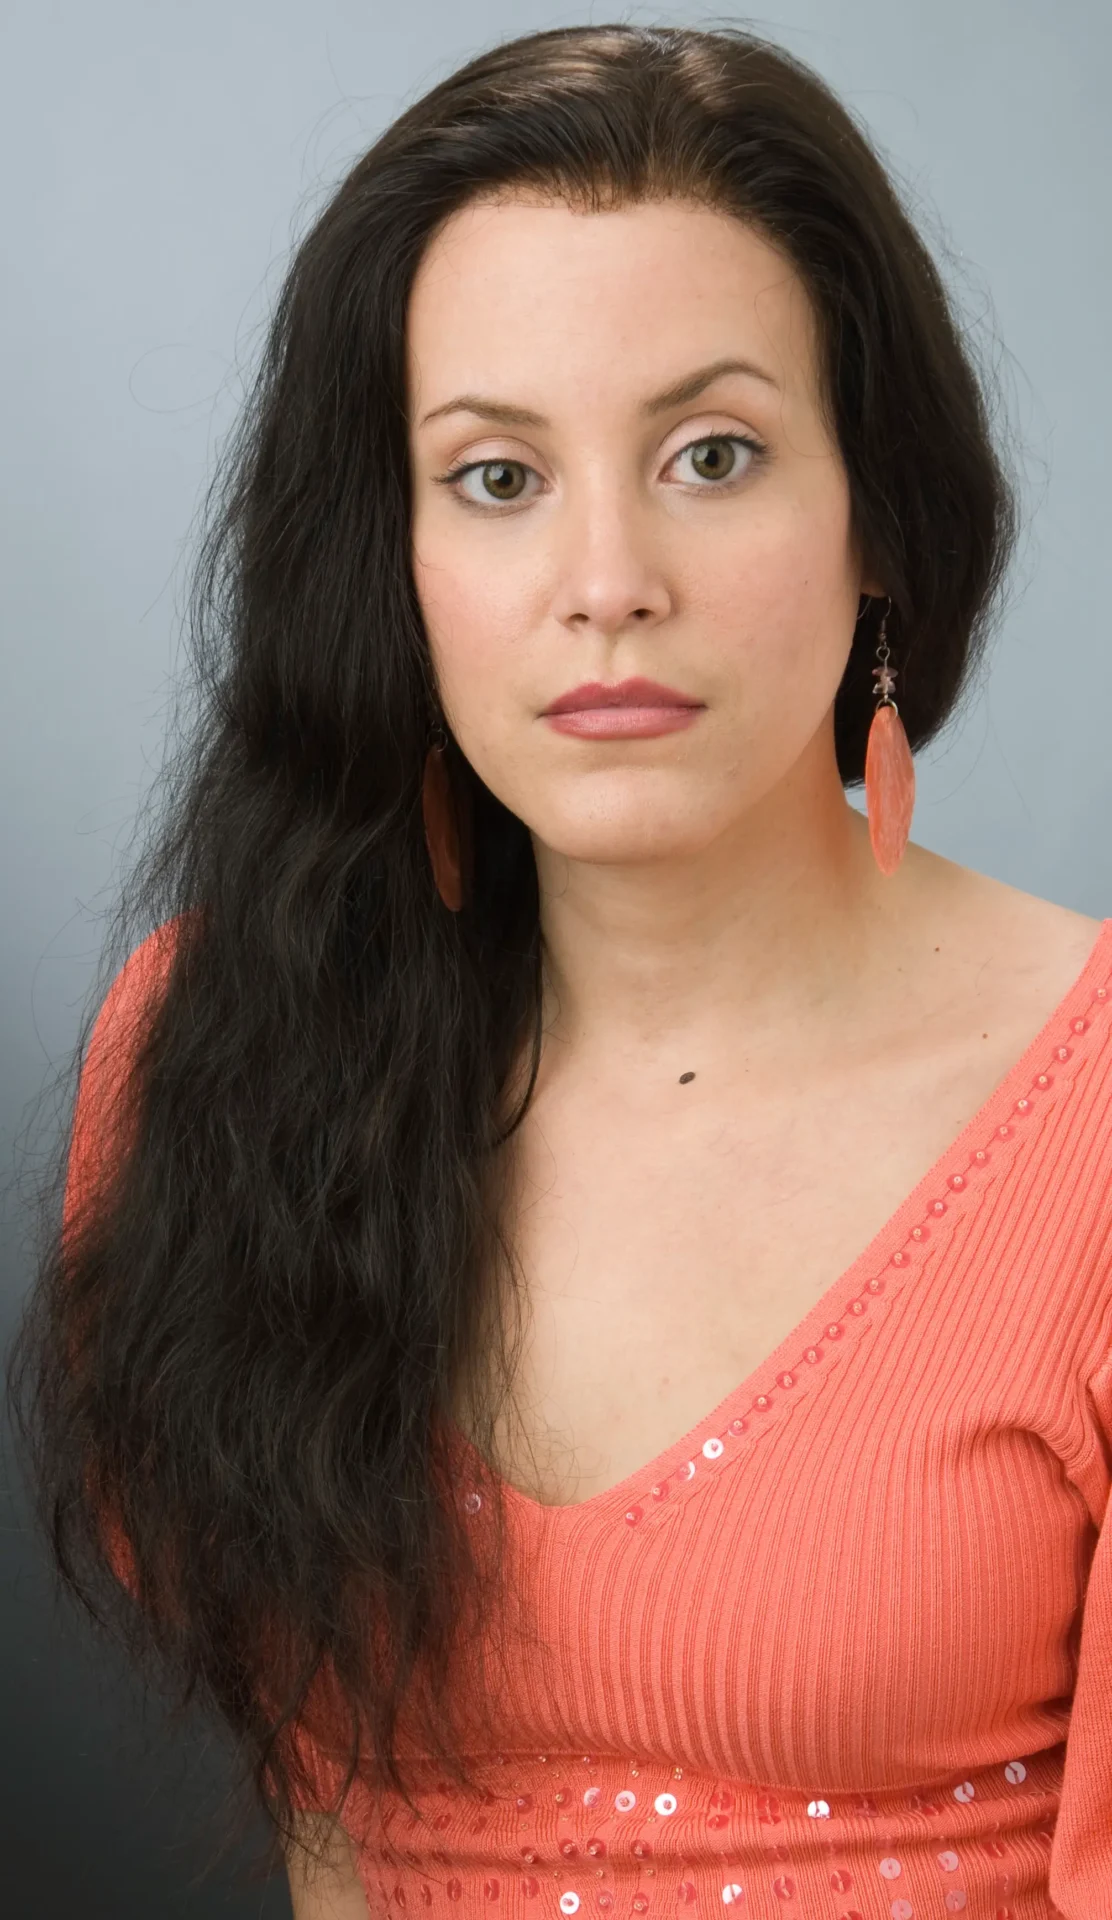 A Woman in an Orange Color Outfit With Dark Hair